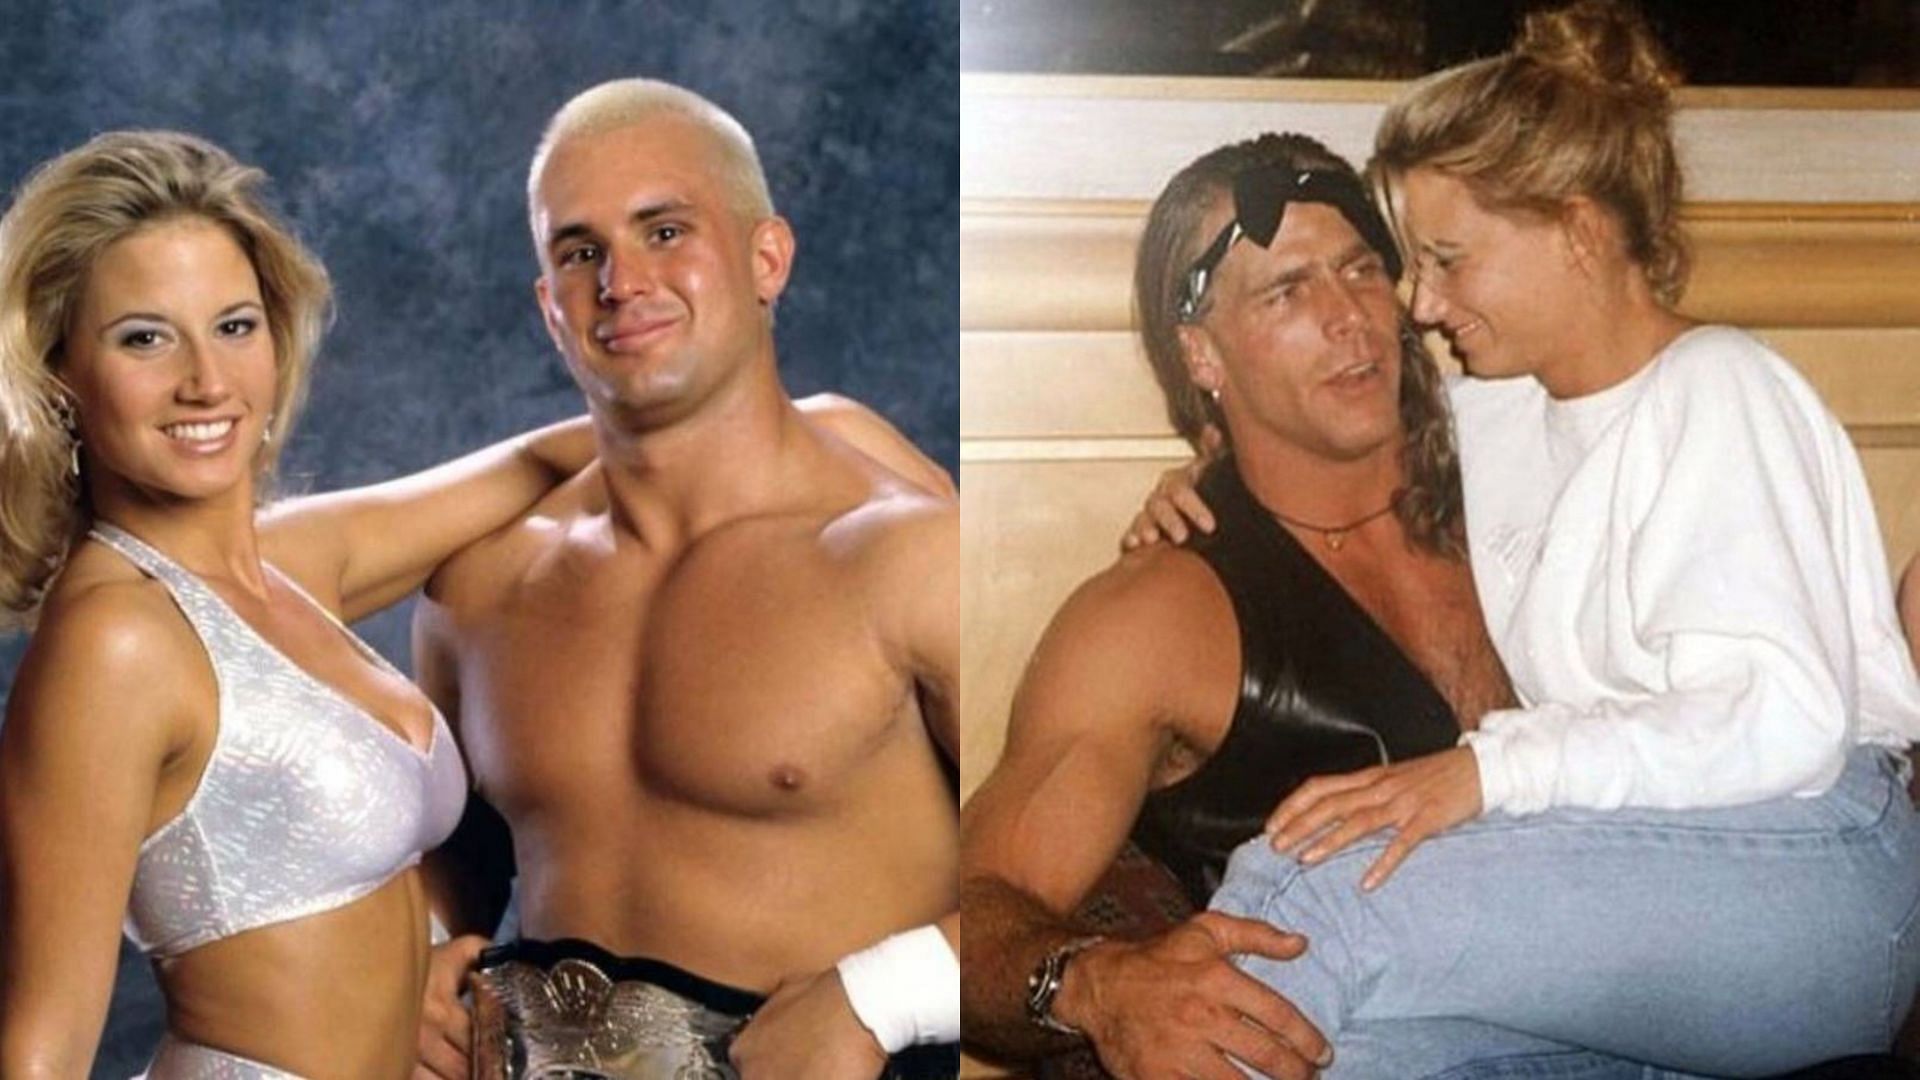 Sunny with Chris Candido (left) and Shawn Michaels (right)